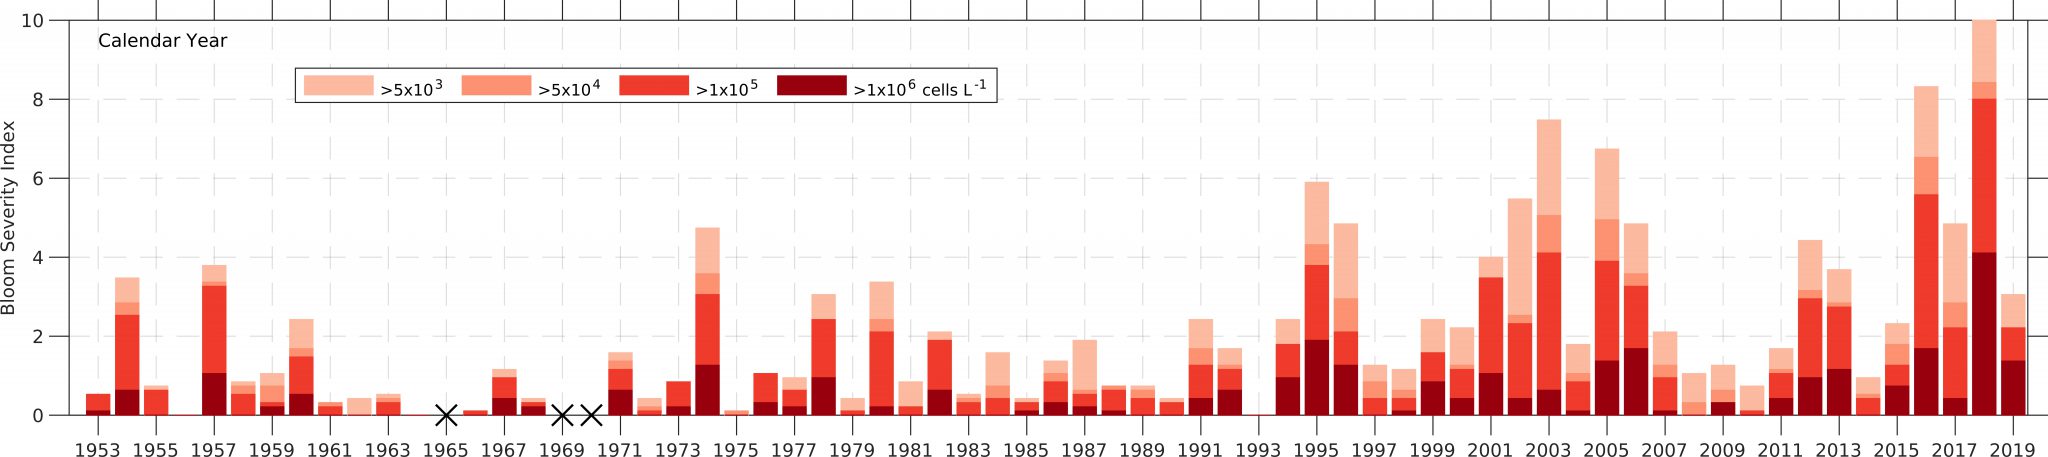 bar chart showing red bars representing bloom severity from 1953 to 2019